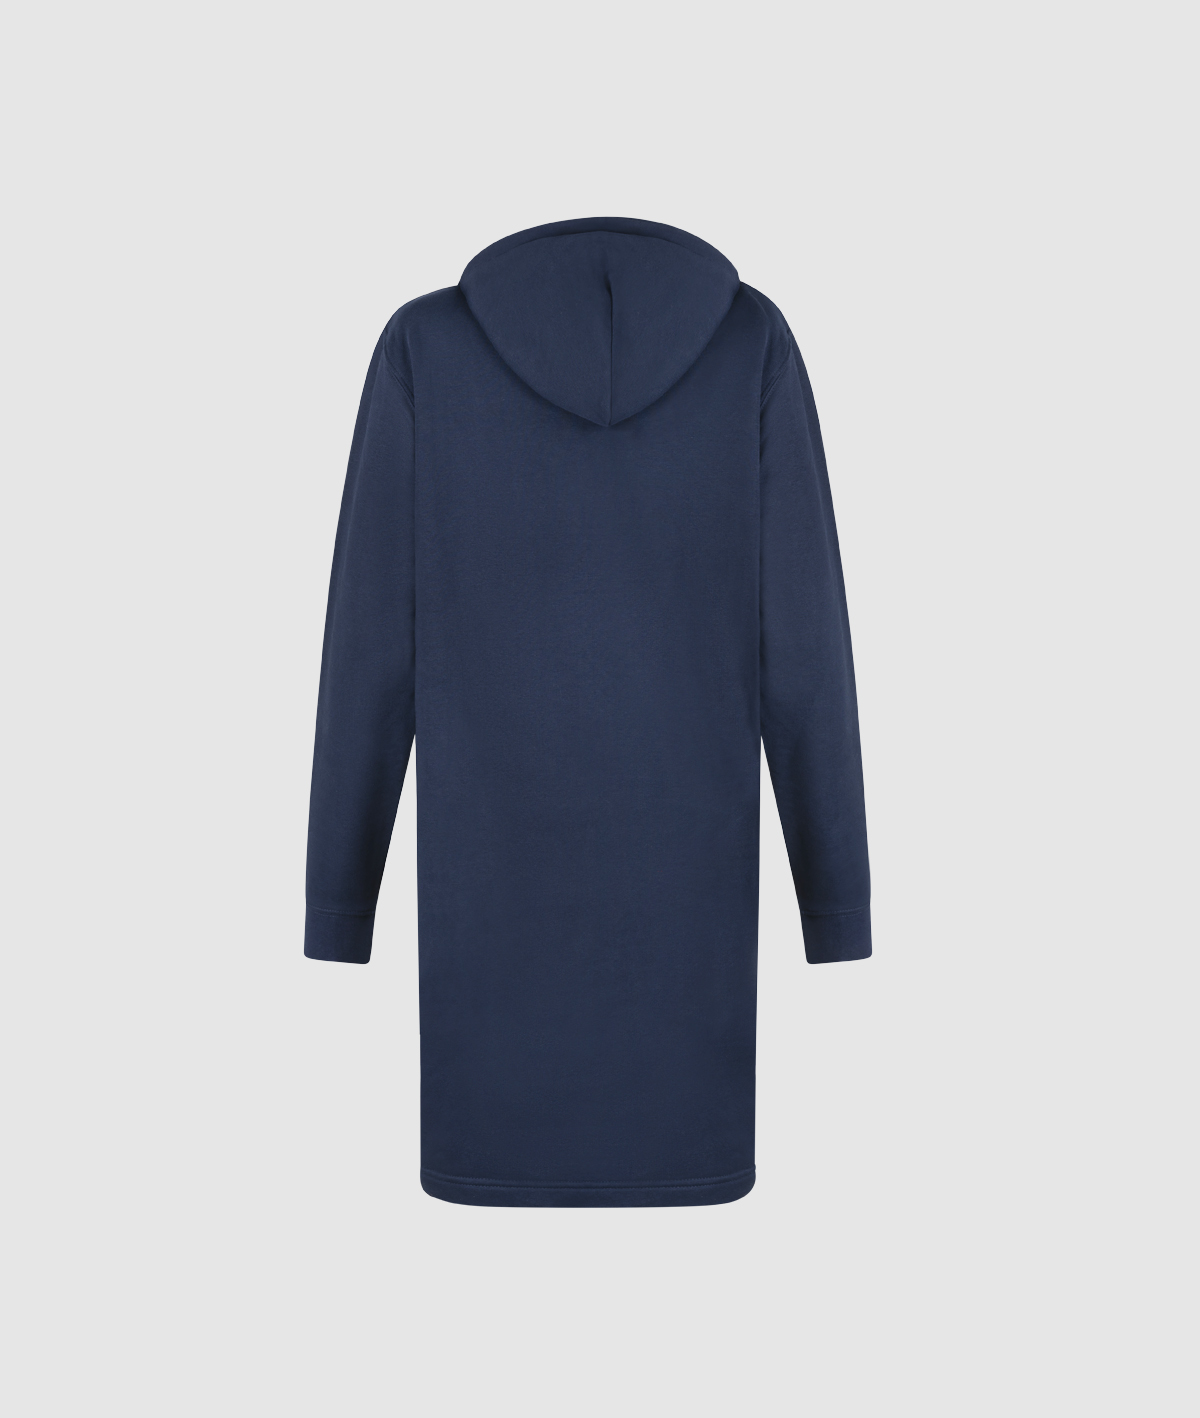 Dress Streeter IEU Hoodie. french navy colour back